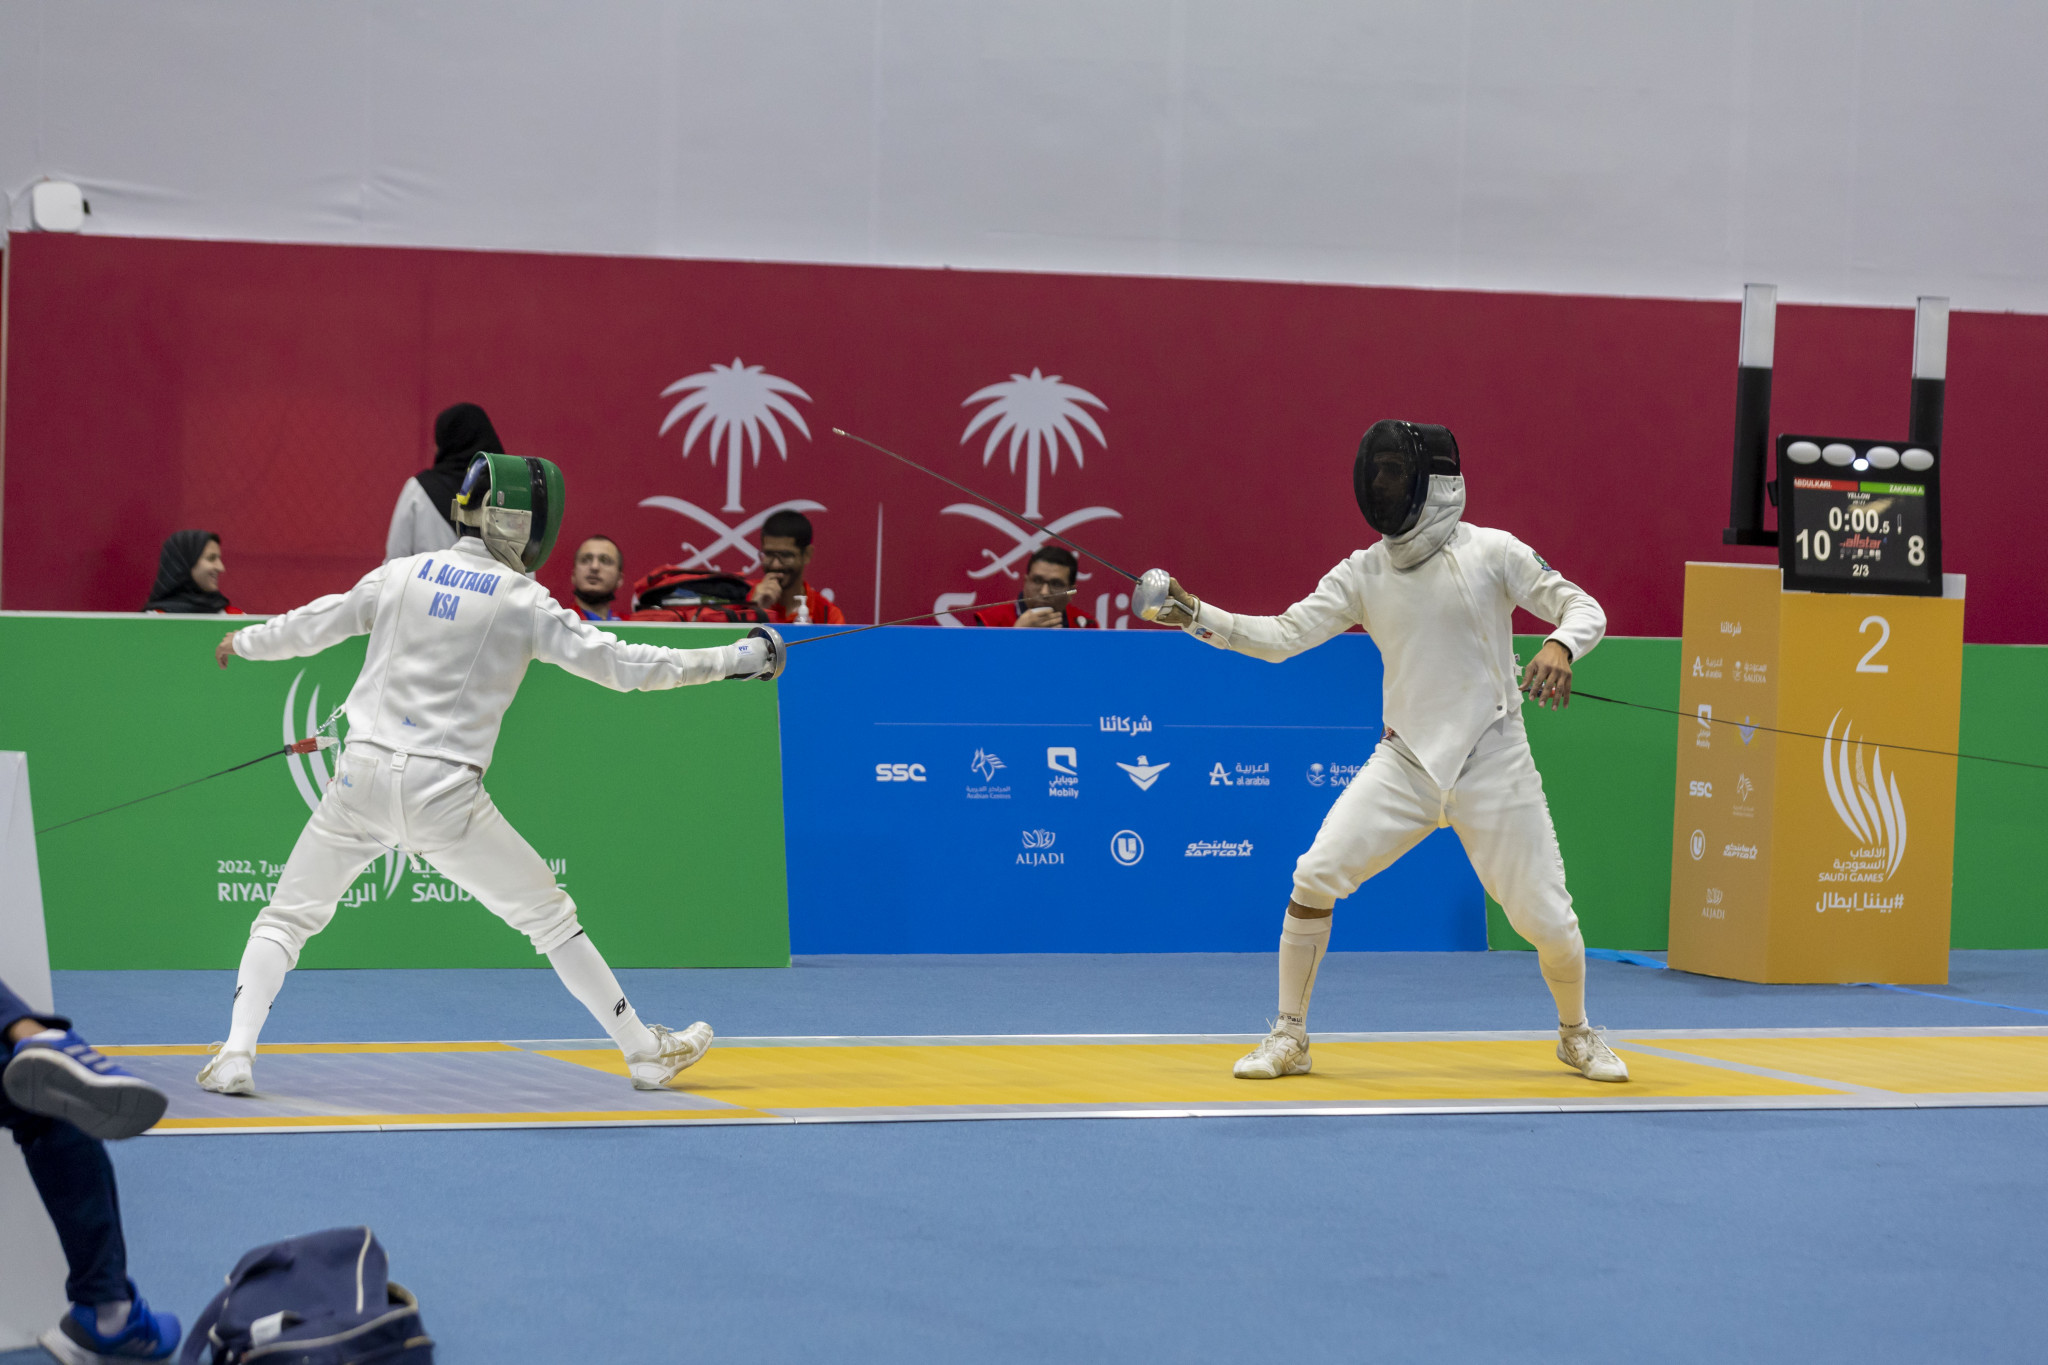 The last of the fencing duels at the Saudi Games were staged today ©Saudi Games